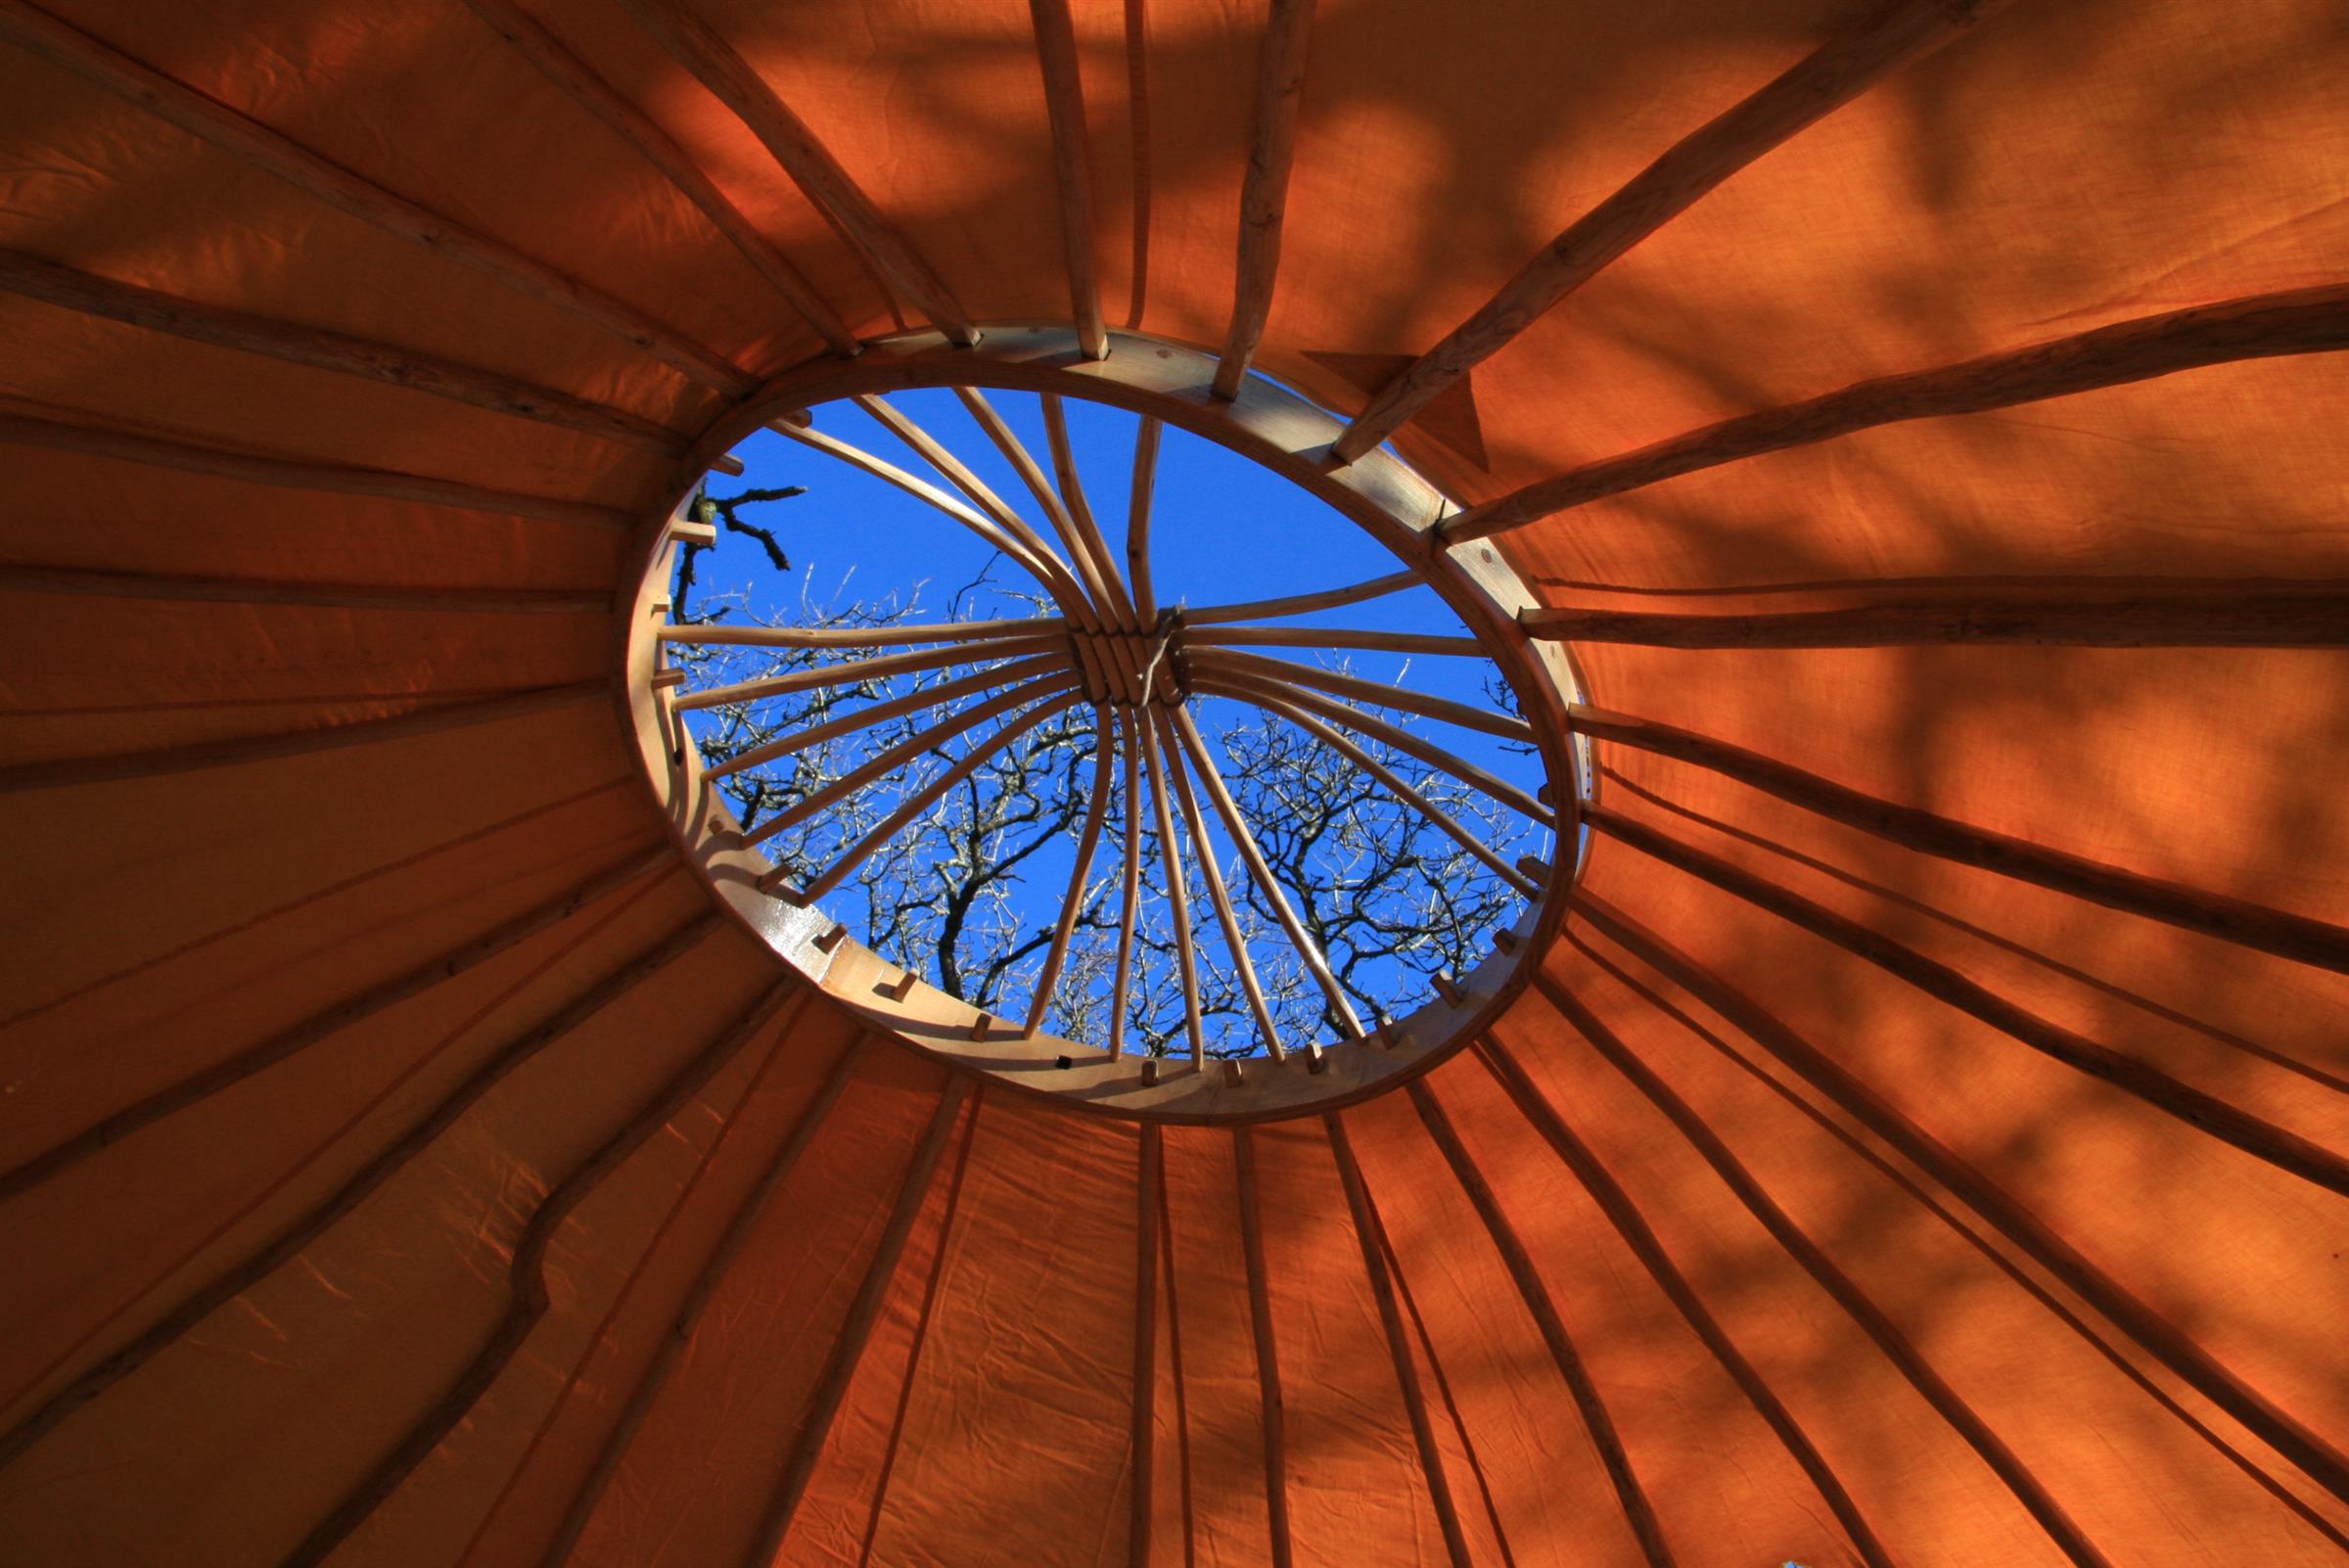 view of the sky and trees through the wheel of the yurts